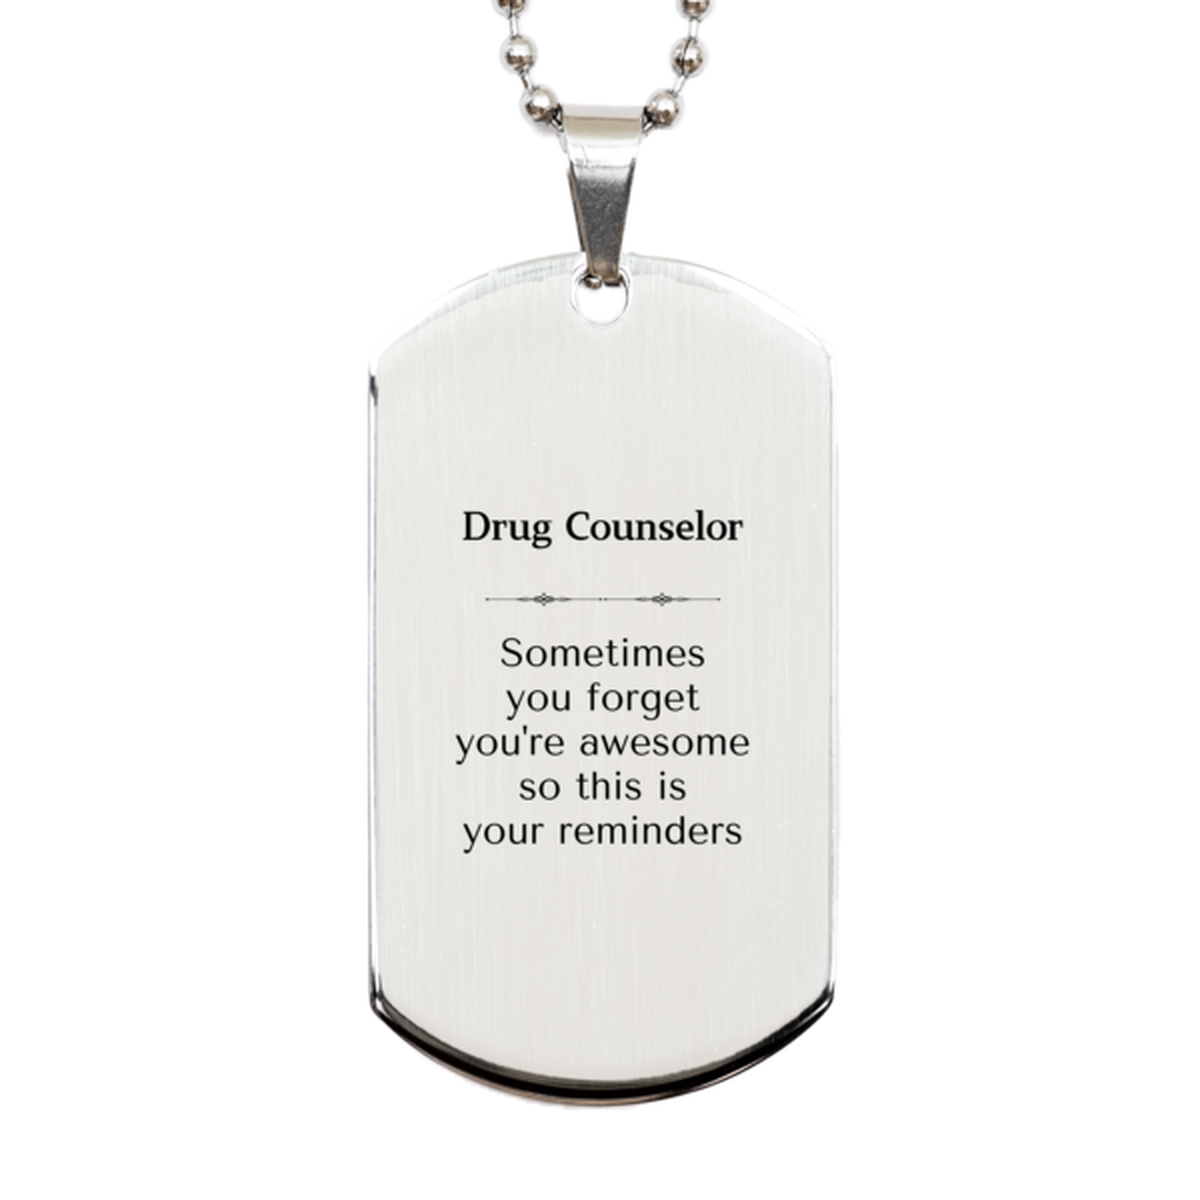 Sentimental Drug Counselor Silver Dog Tag, Drug Counselor Sometimes you forget you're awesome so this is your reminders, Graduation Christmas Birthday Gifts for Drug Counselor, Men, Women, Coworkers